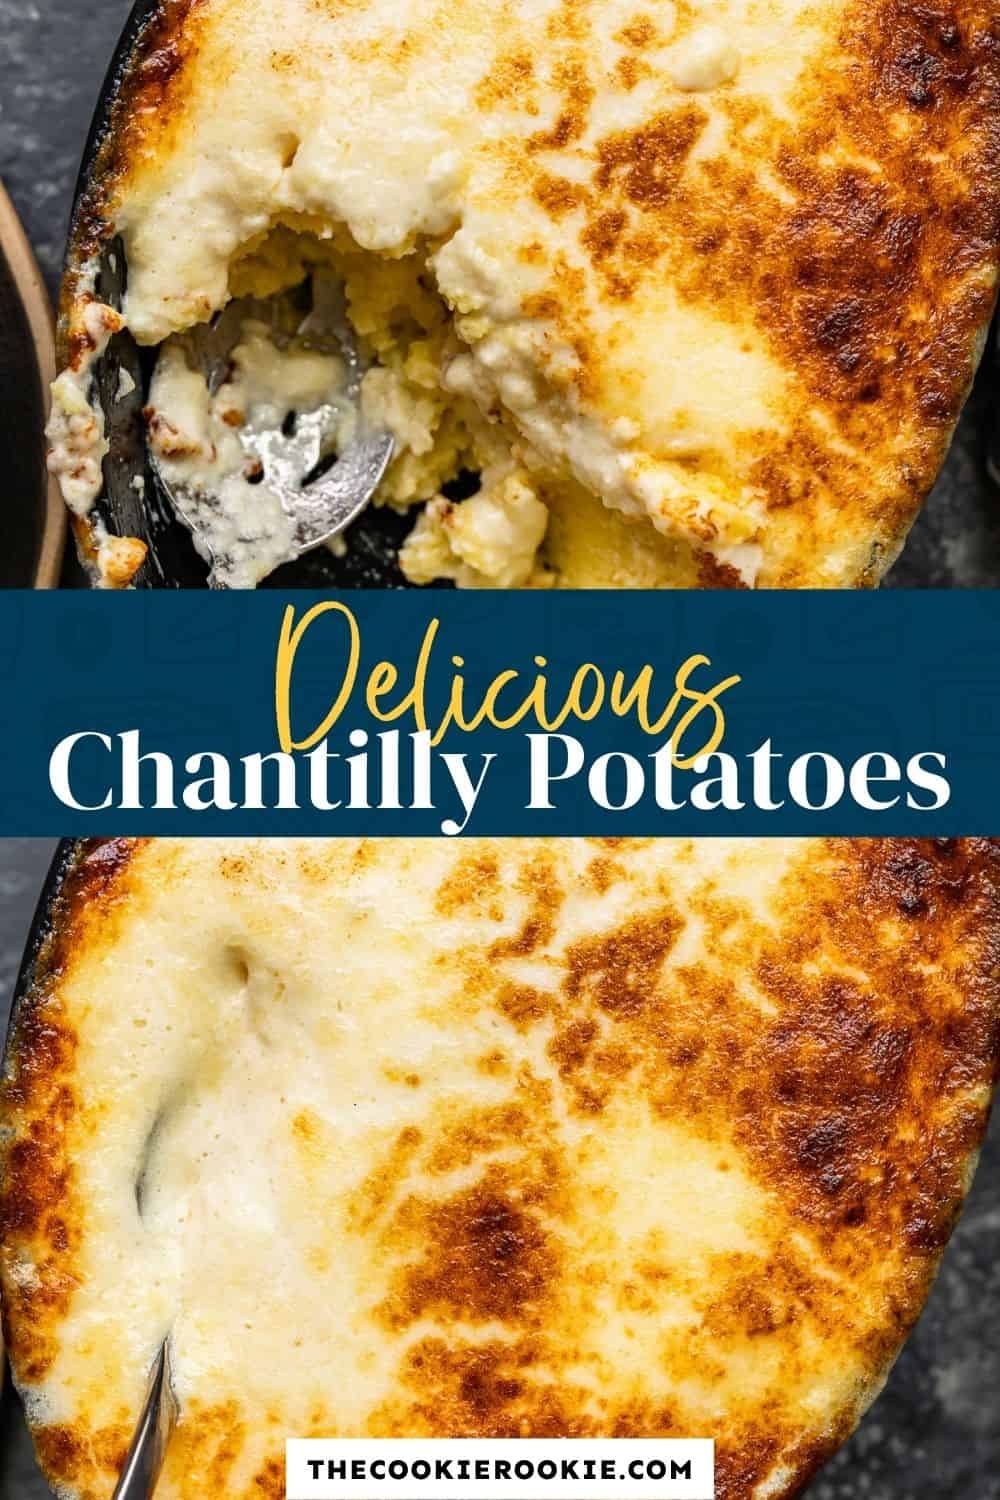 Chantilly Potatoes - The Cookie Rookie®